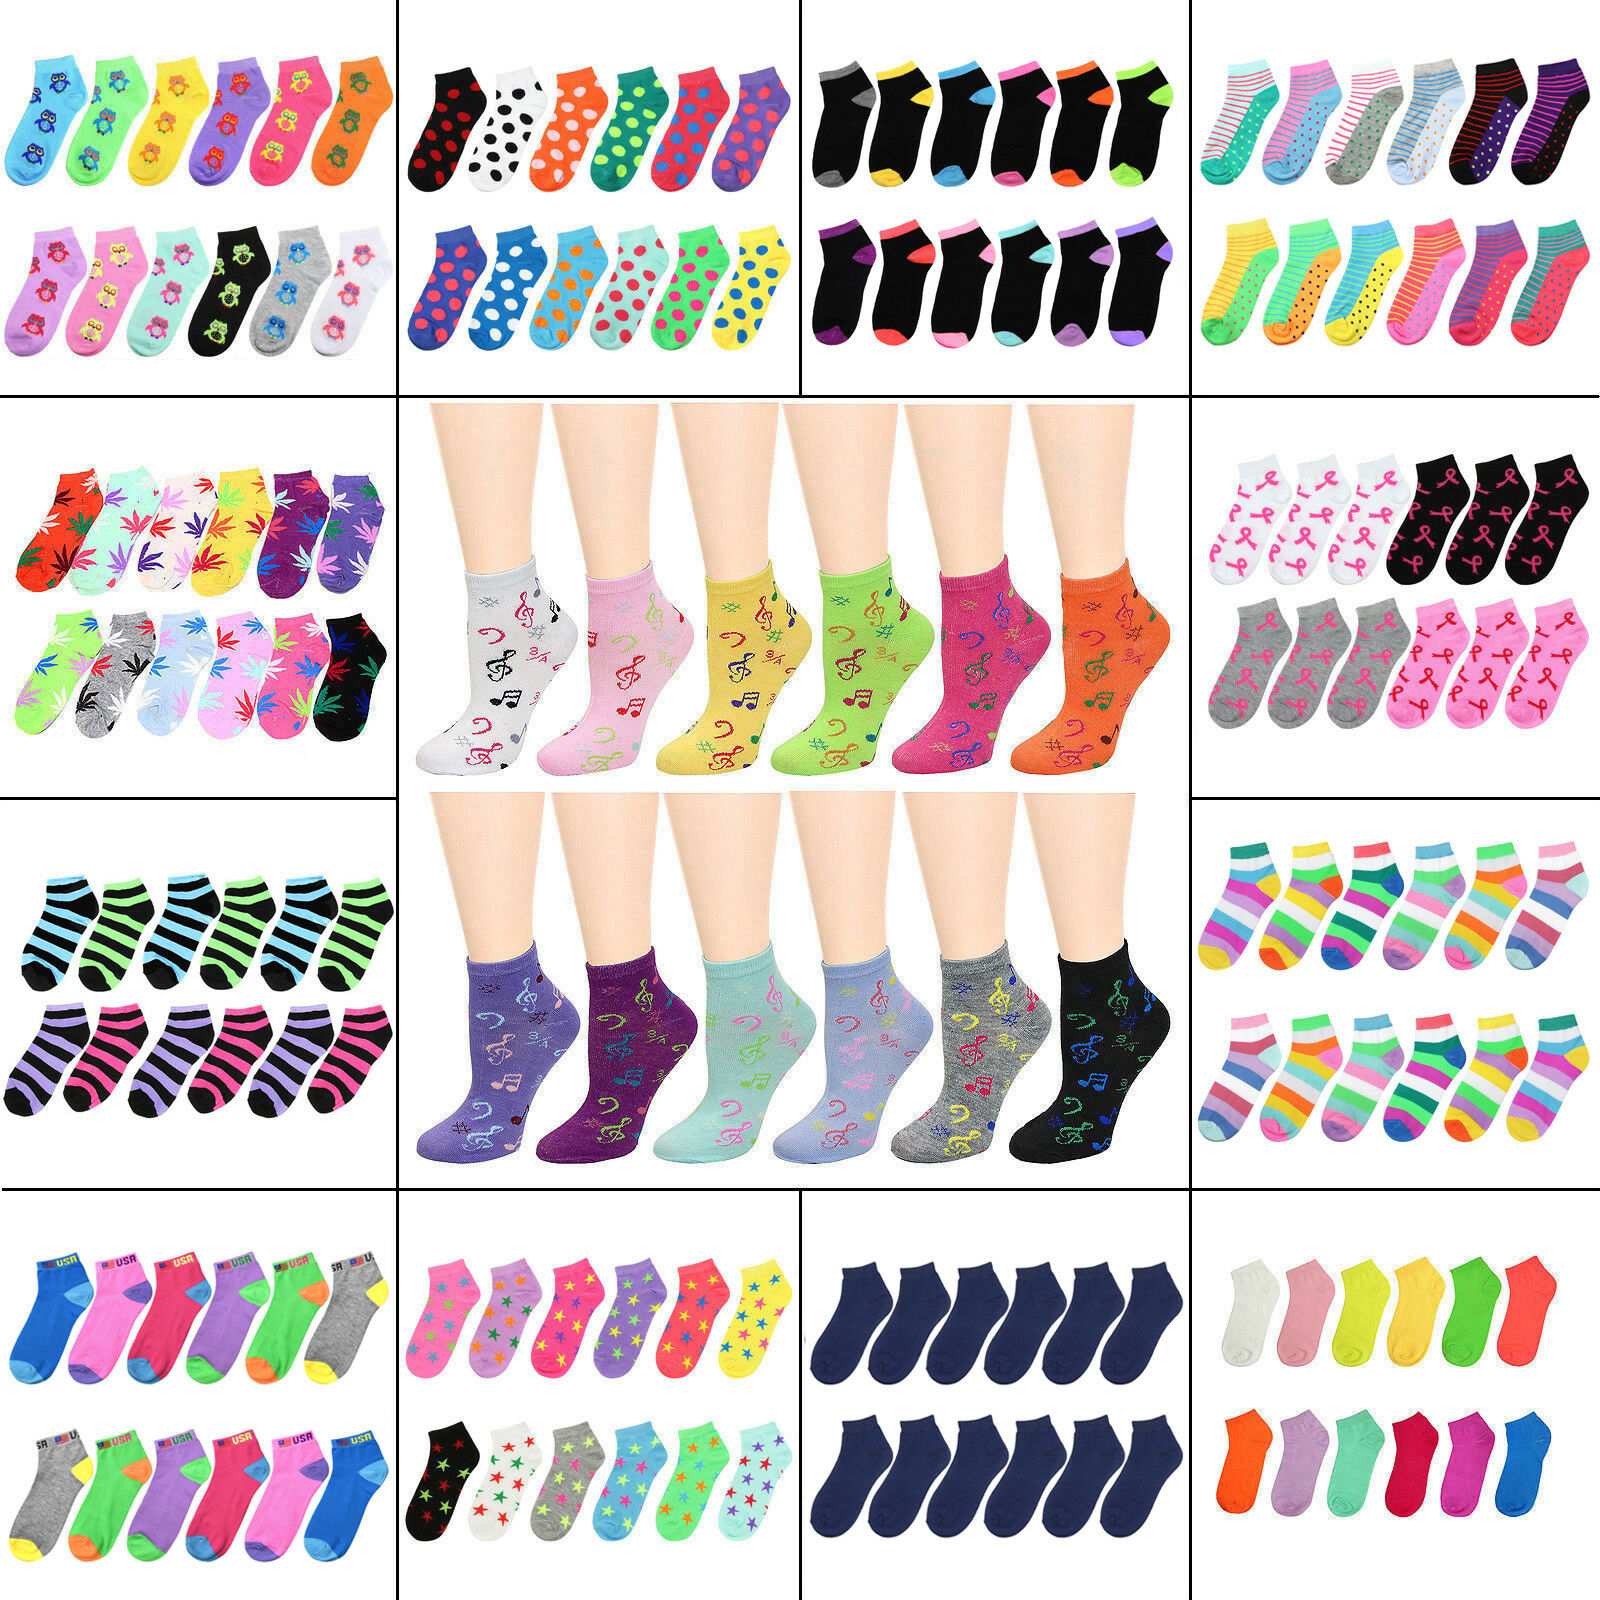 12 Pairs Women Ankle Socks Assorted Colors